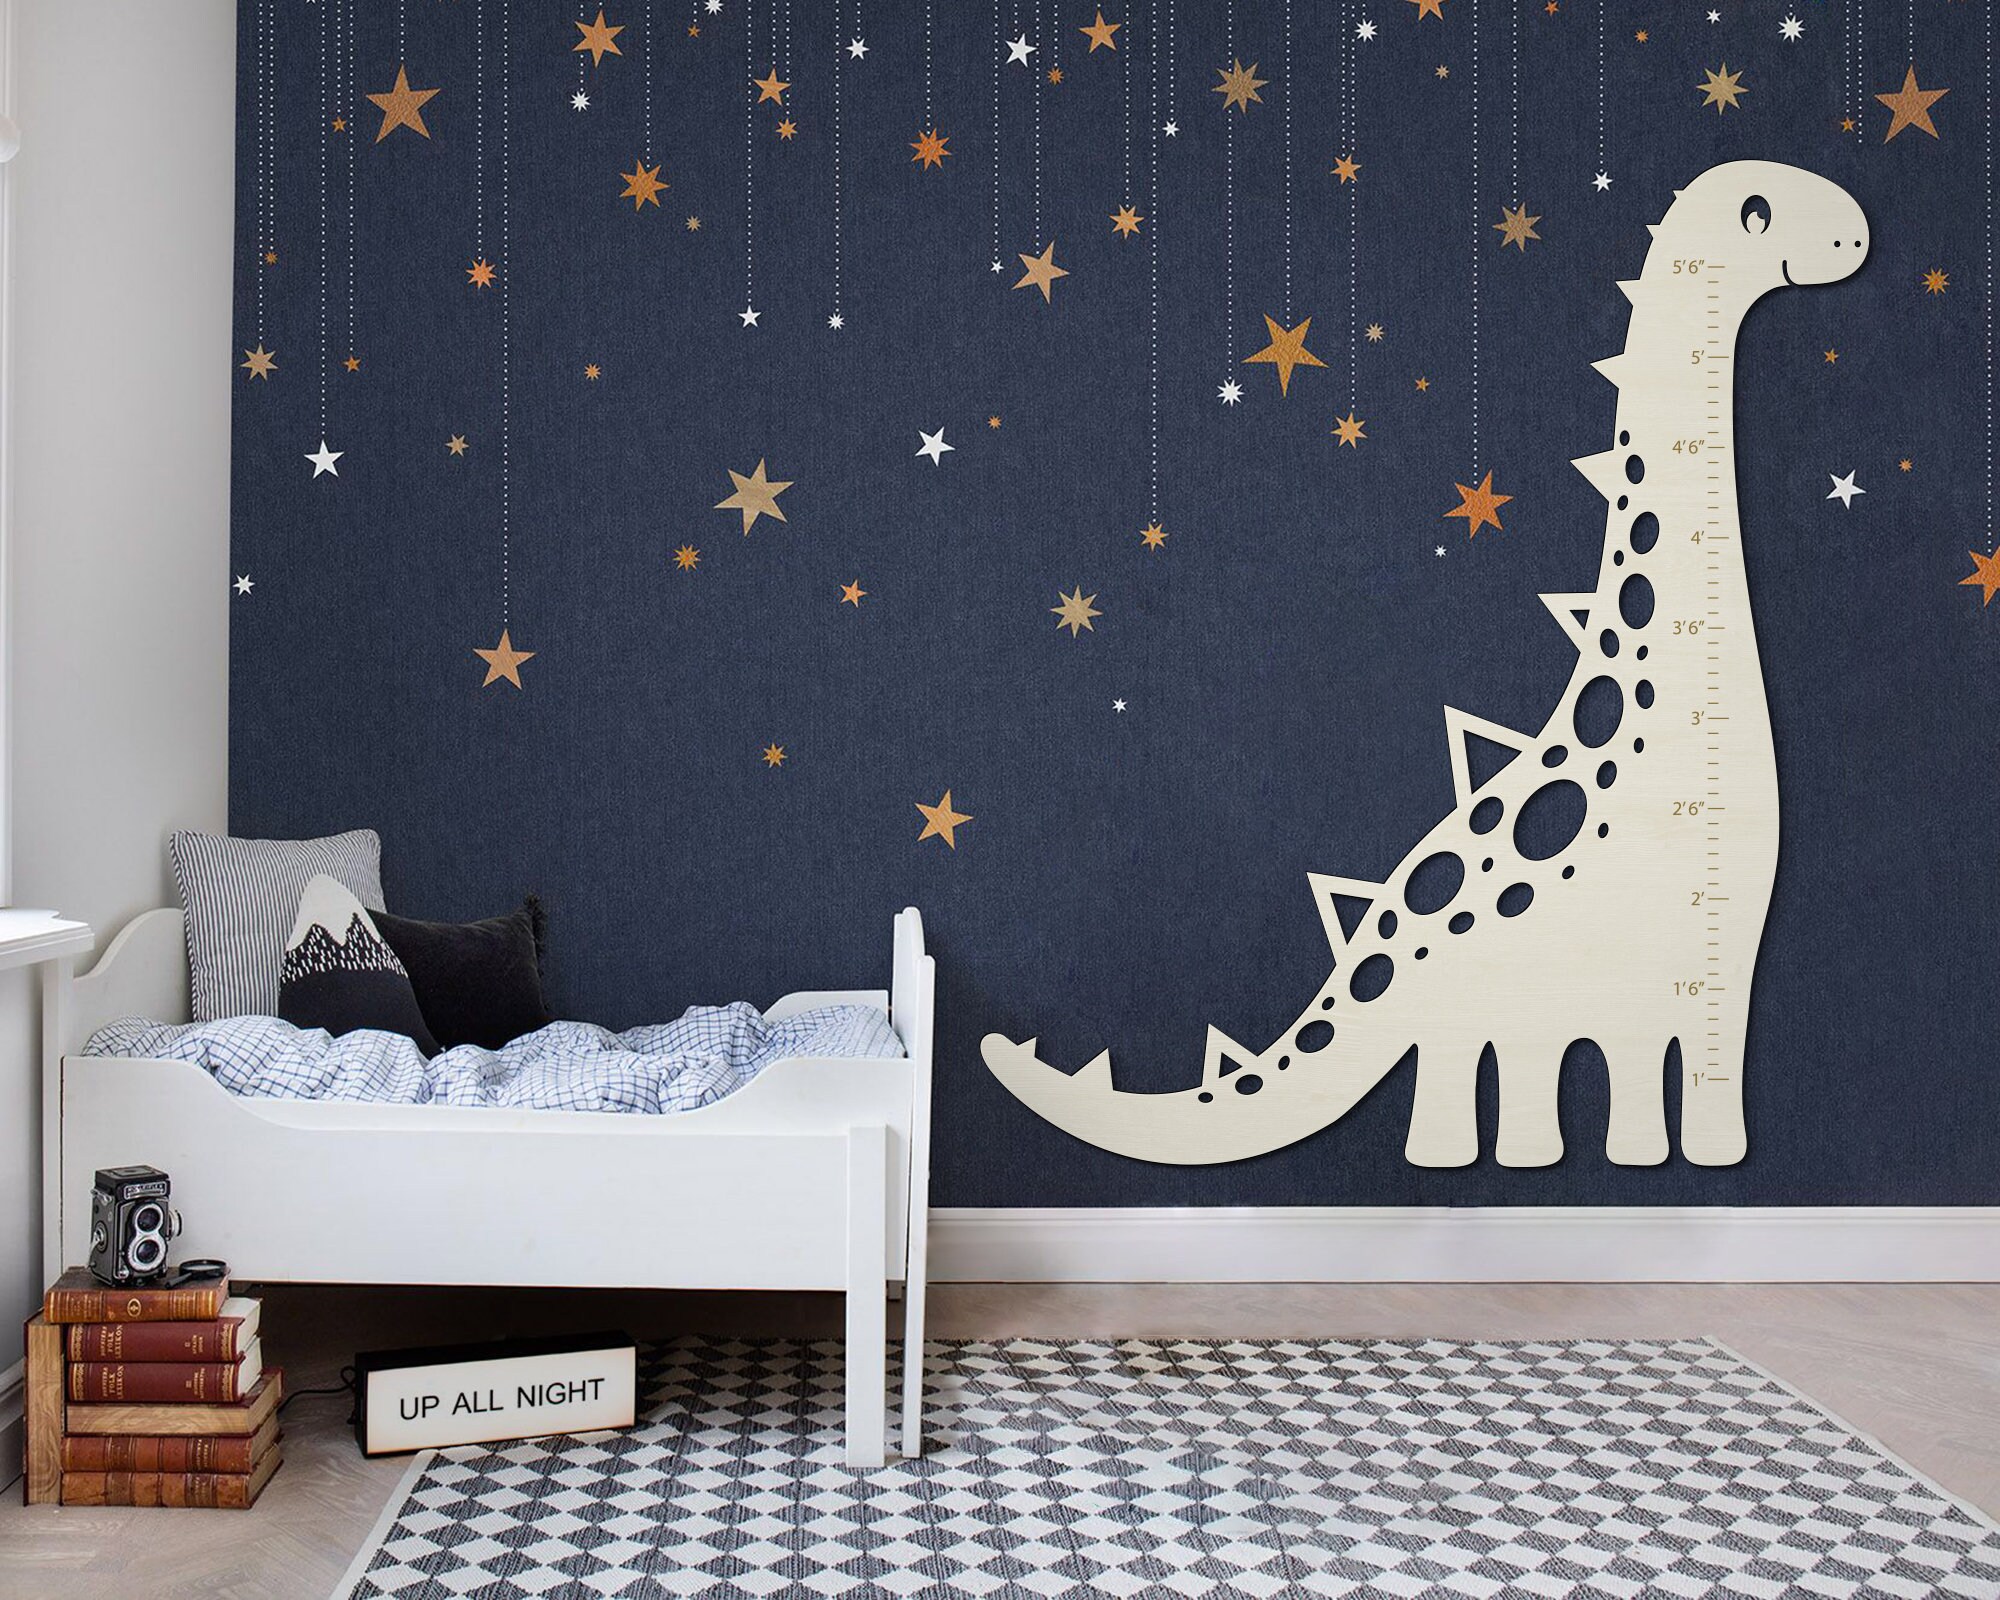 🤰🏻 Nursery Decoration Ideas with Height Chart for Kids ✨